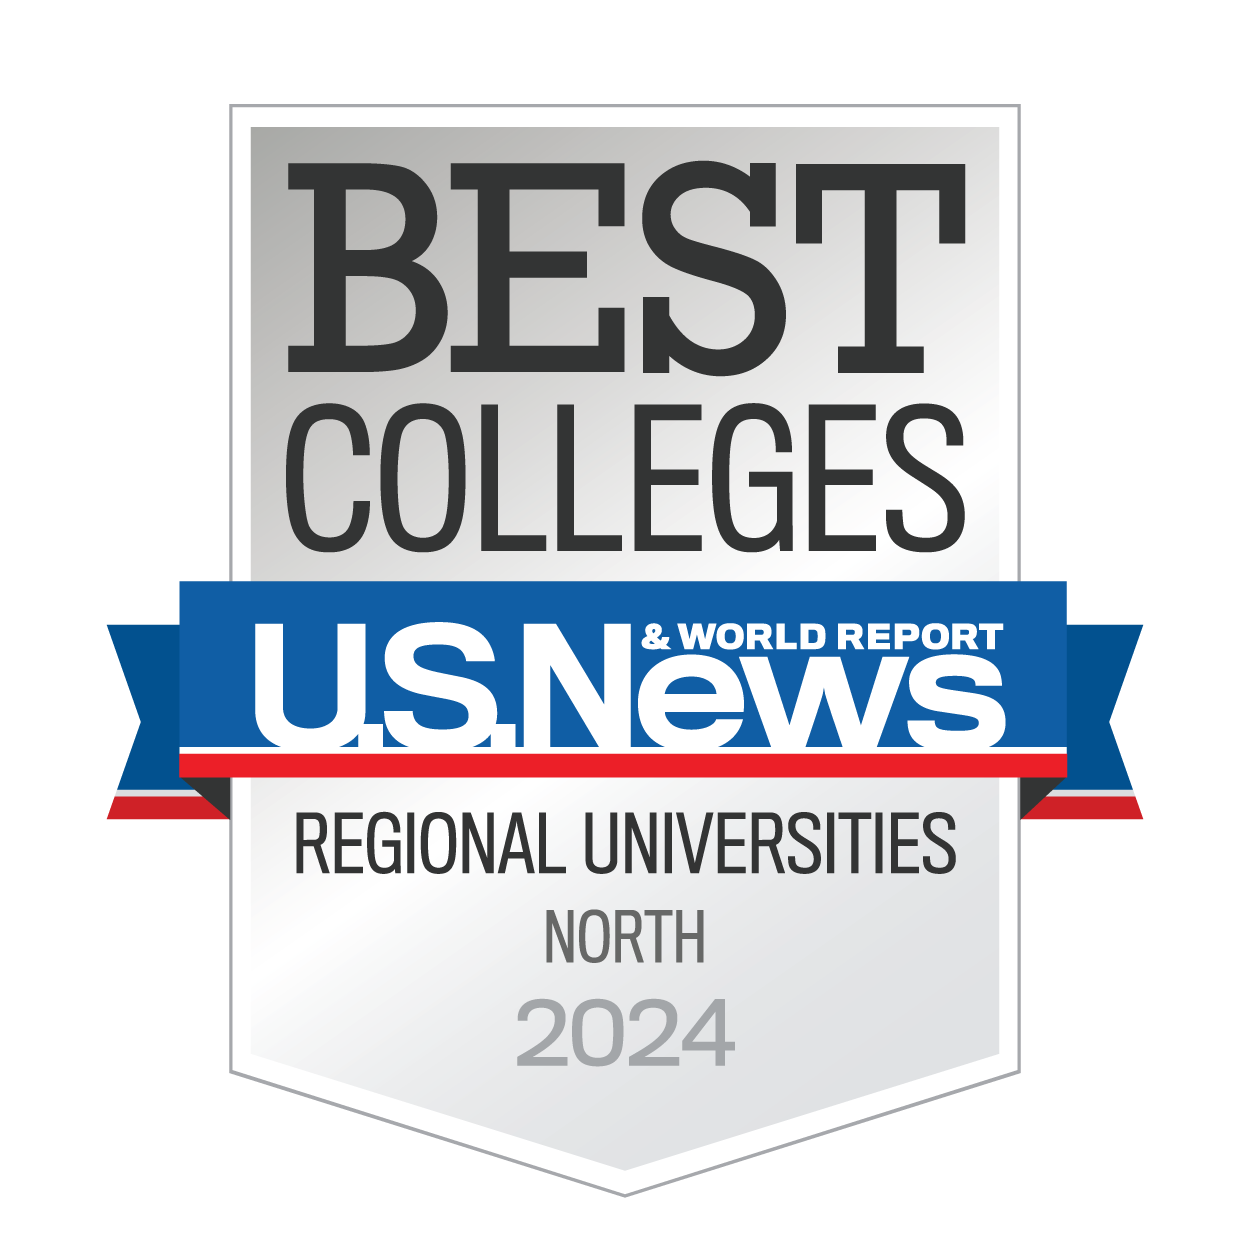 Best Colleges U.S. News and World Report - Regional Universities North 2024